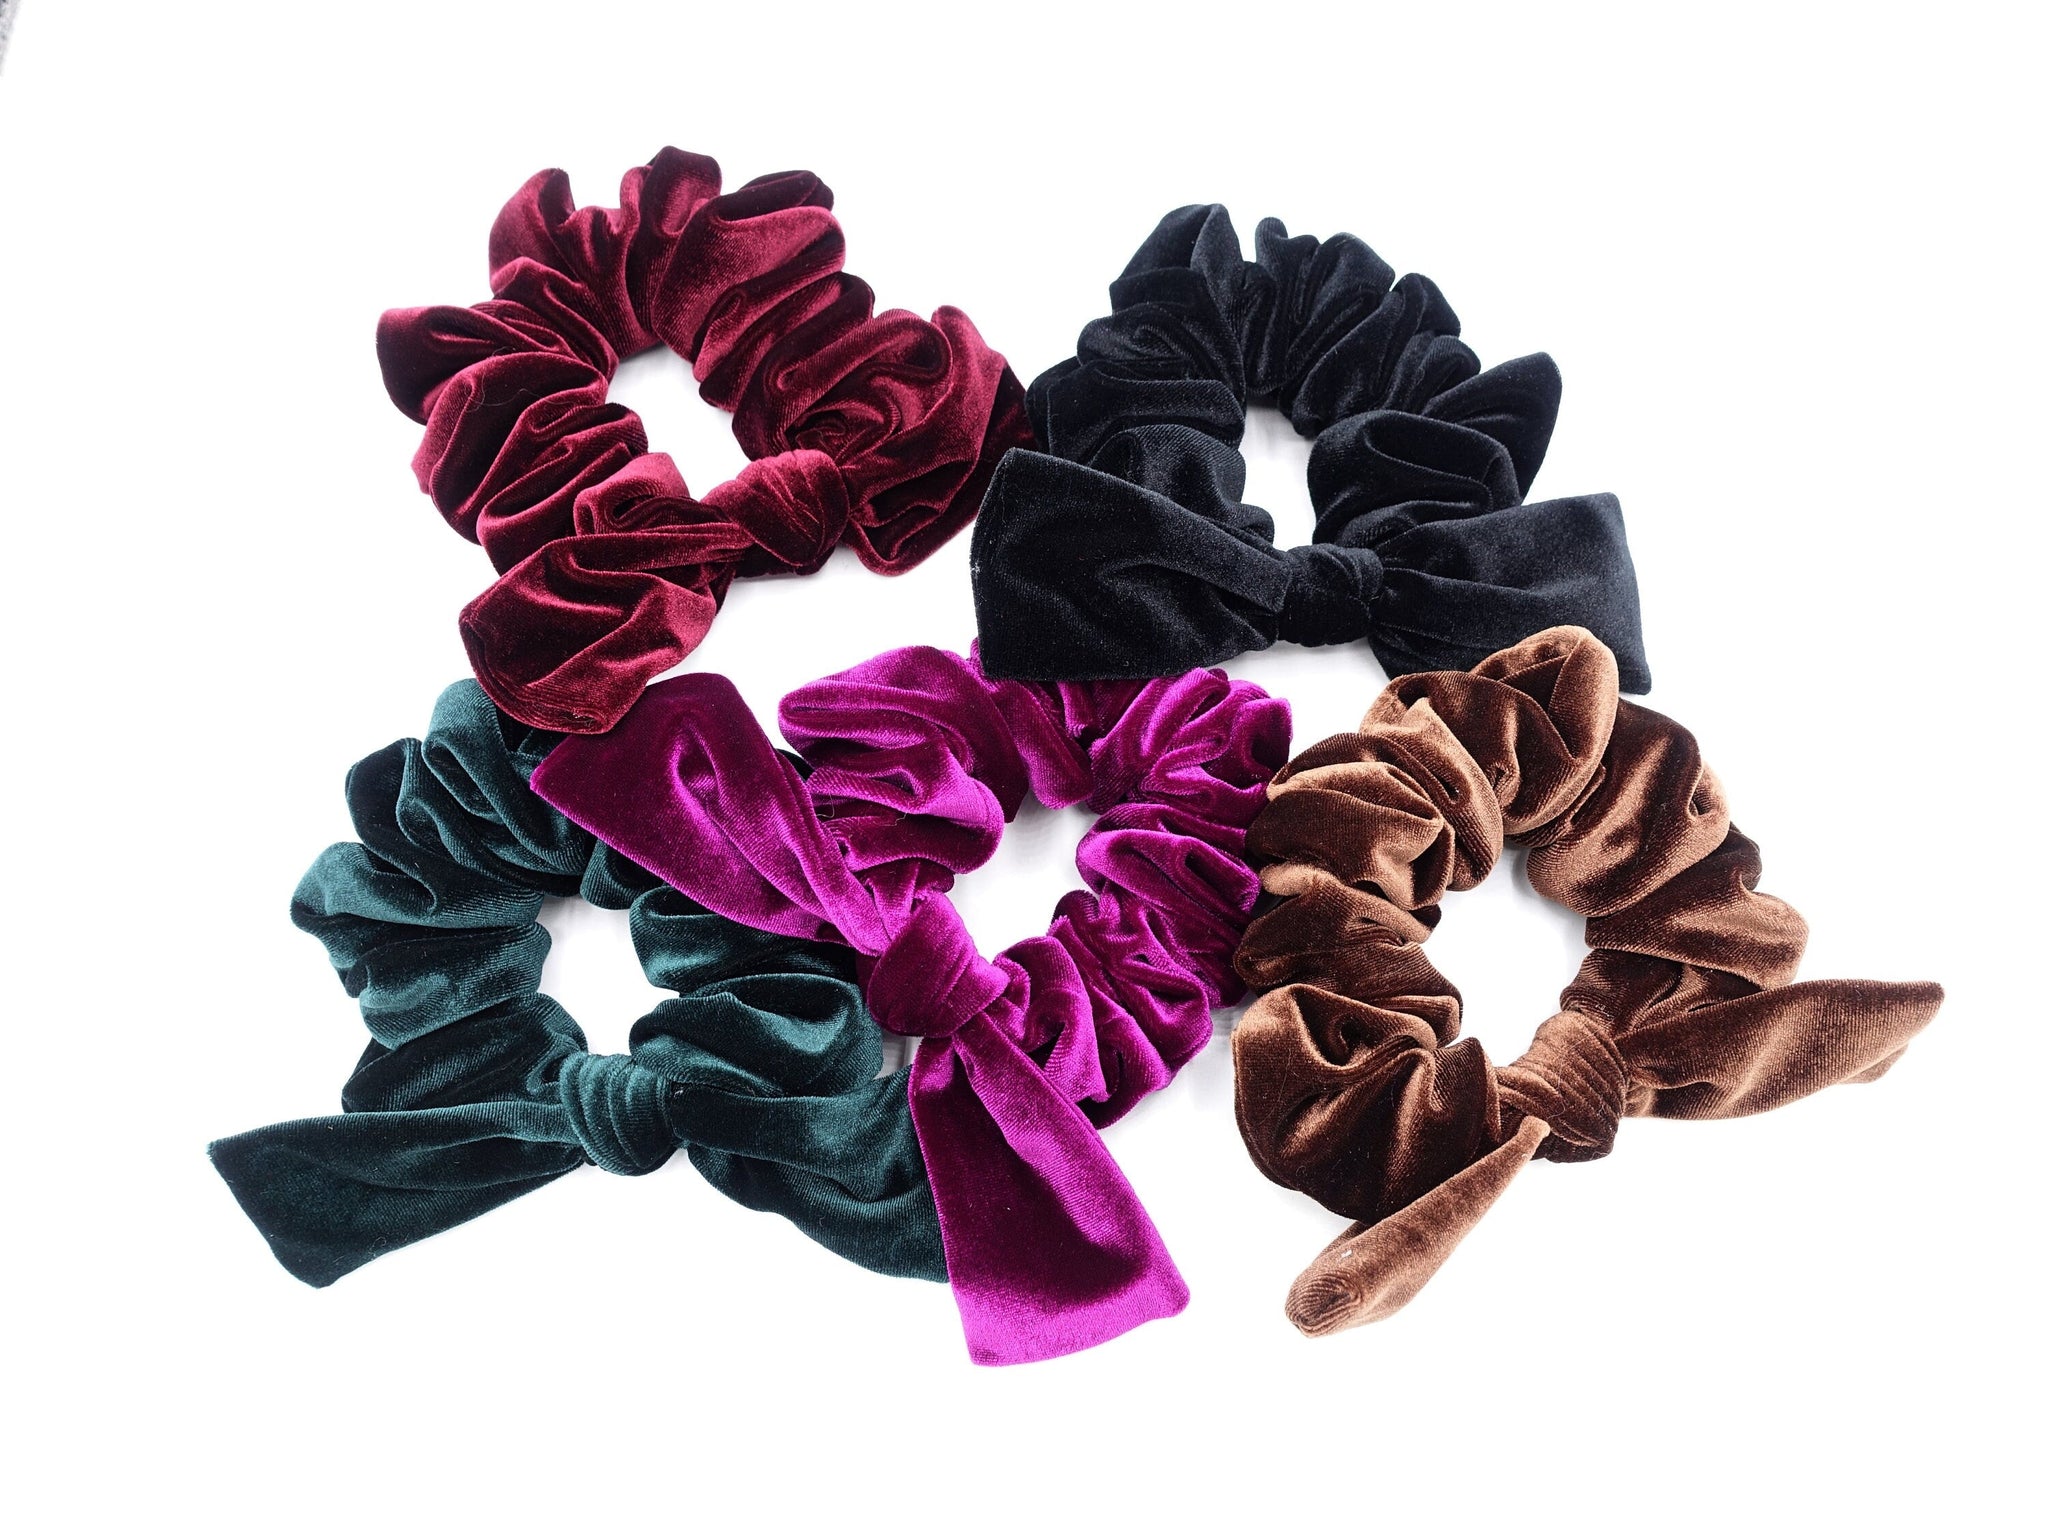 VeryShine thick velvet scrunchies colorful hair elastic scrunchie knot hair accessory for women